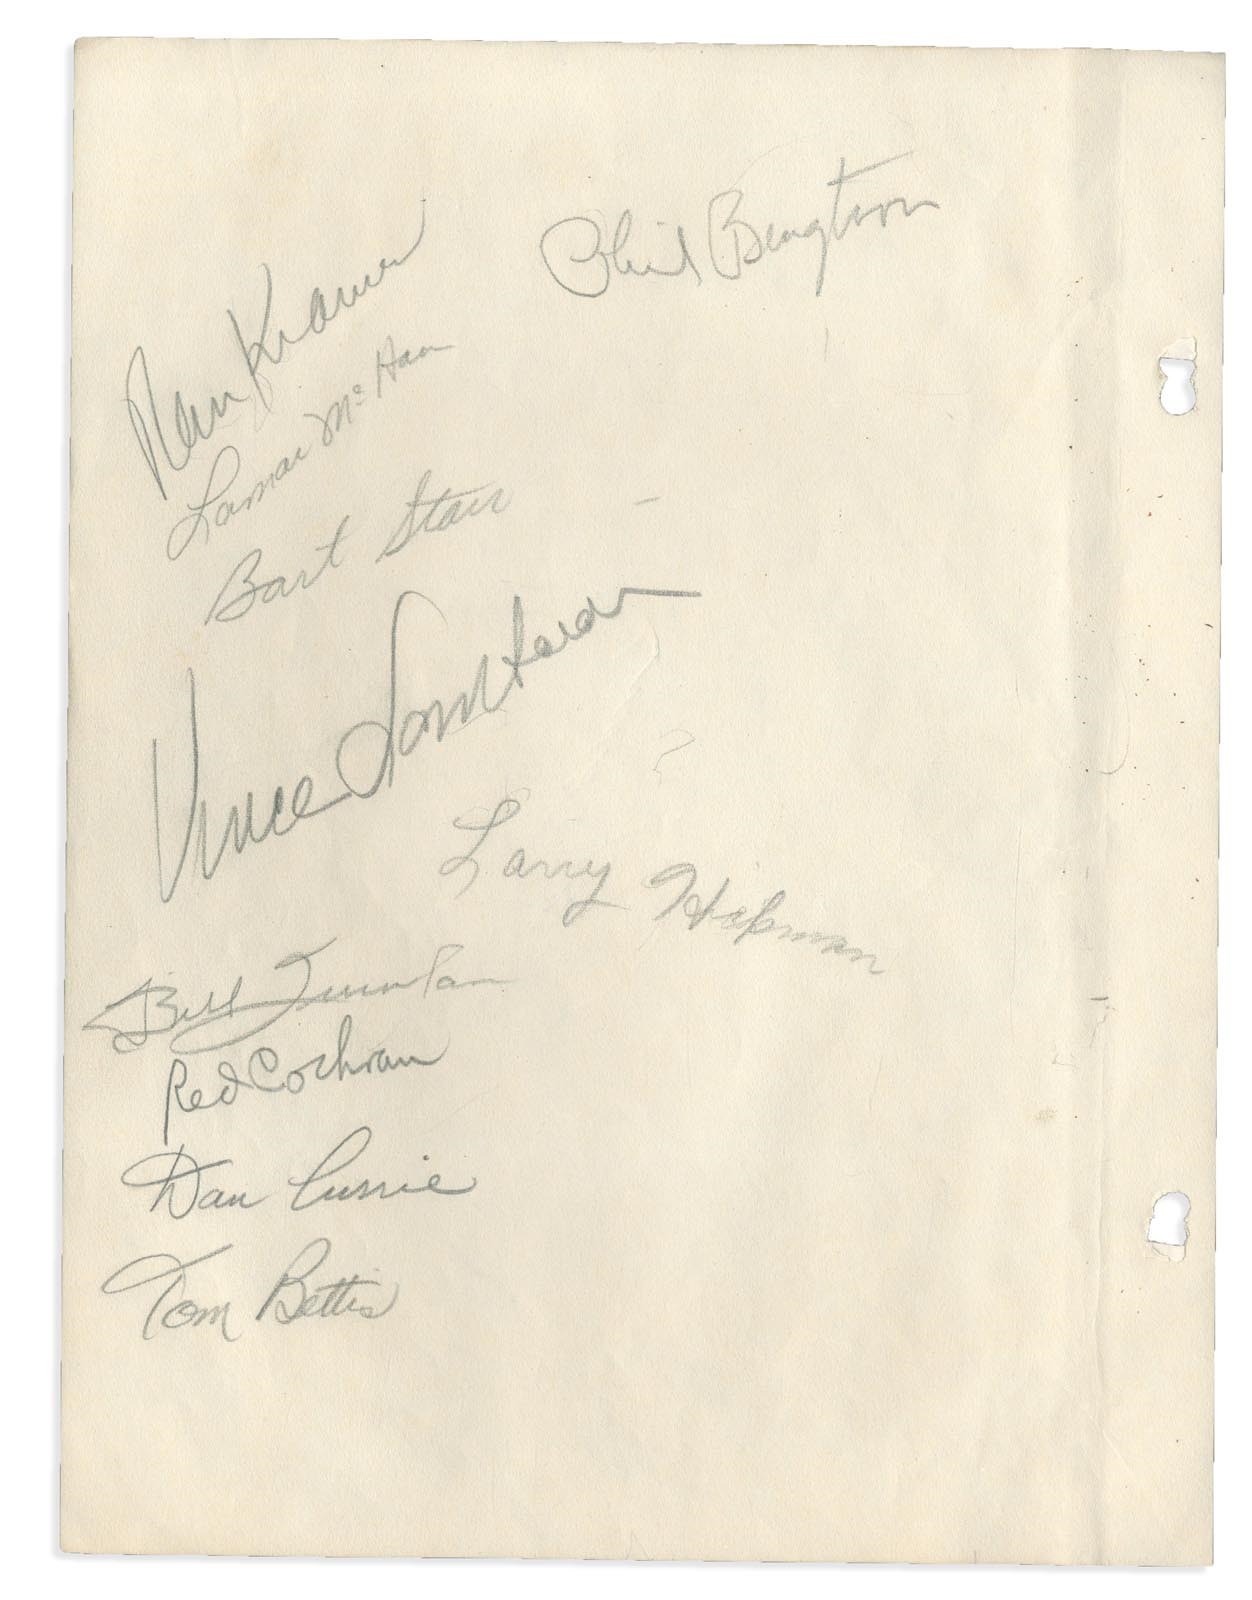 Football - 1960 Green Bay Packers Signed Sheet with Vince Lombardi (PSA)